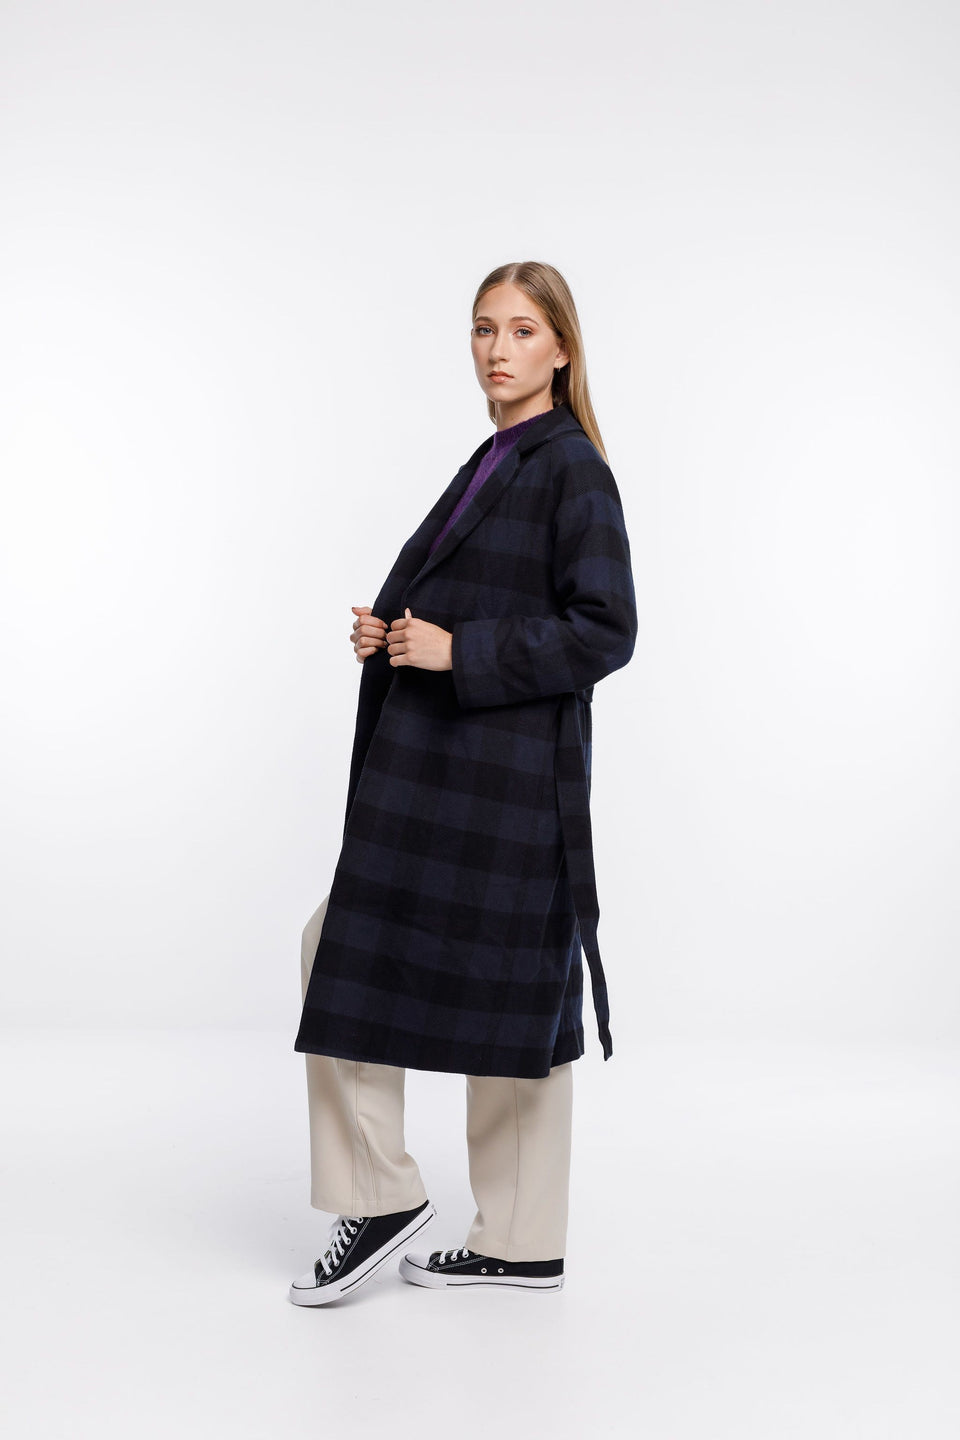 Thing Thing Clement Coat Navy Check